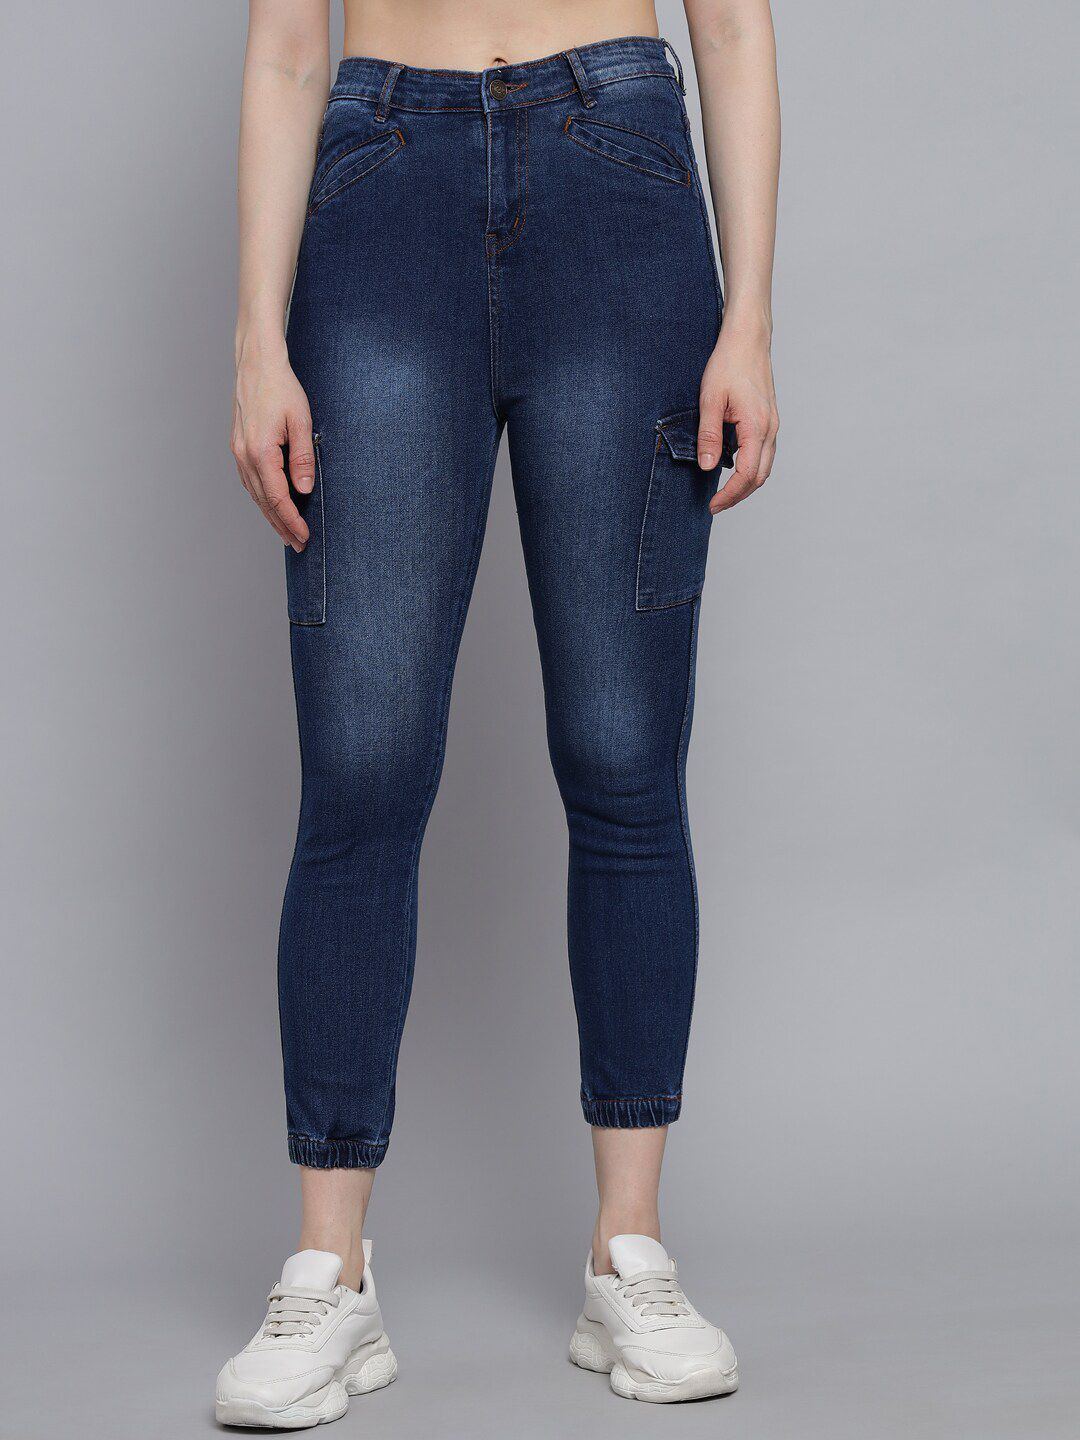 Q-rious Women Blue Jogger High-Rise Light Fade Stretchable Jeans Price in India